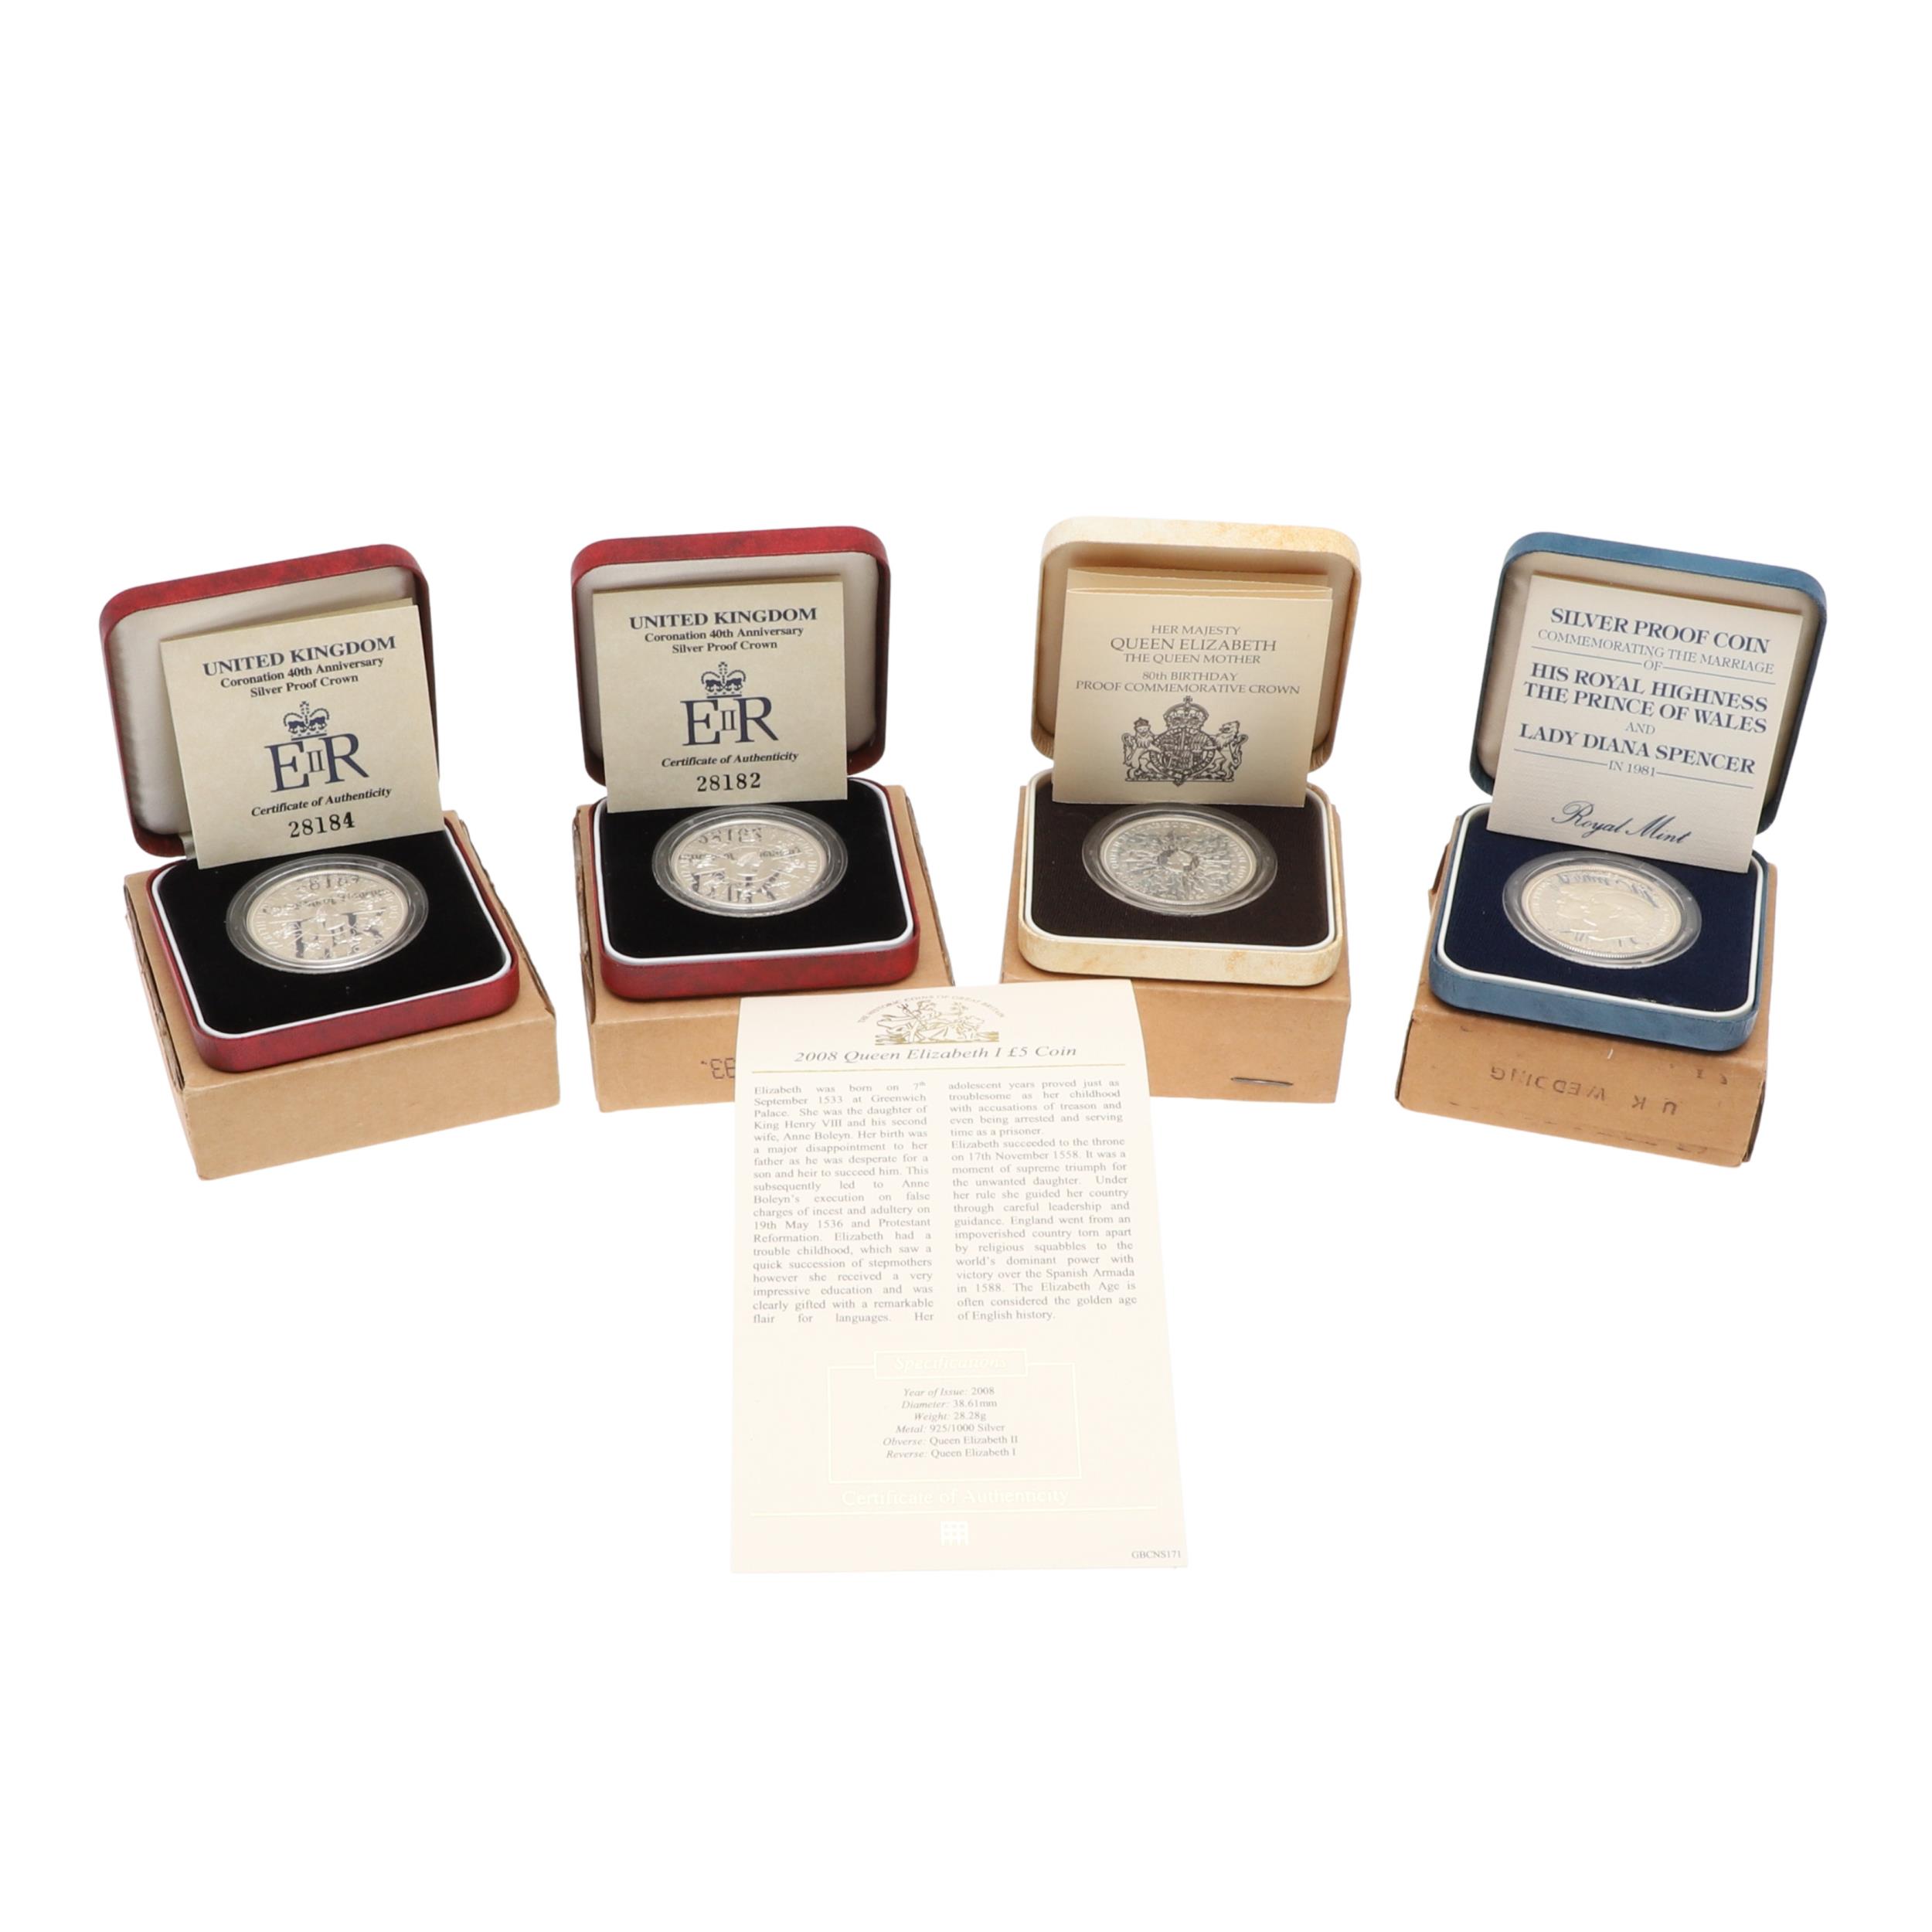 A COLLECTION OF ROYAL MINT SILVER PROOF COINS TO INCLUDE A 1994 D-DAY COMMEMORATIVE FIFTY PENCE AND